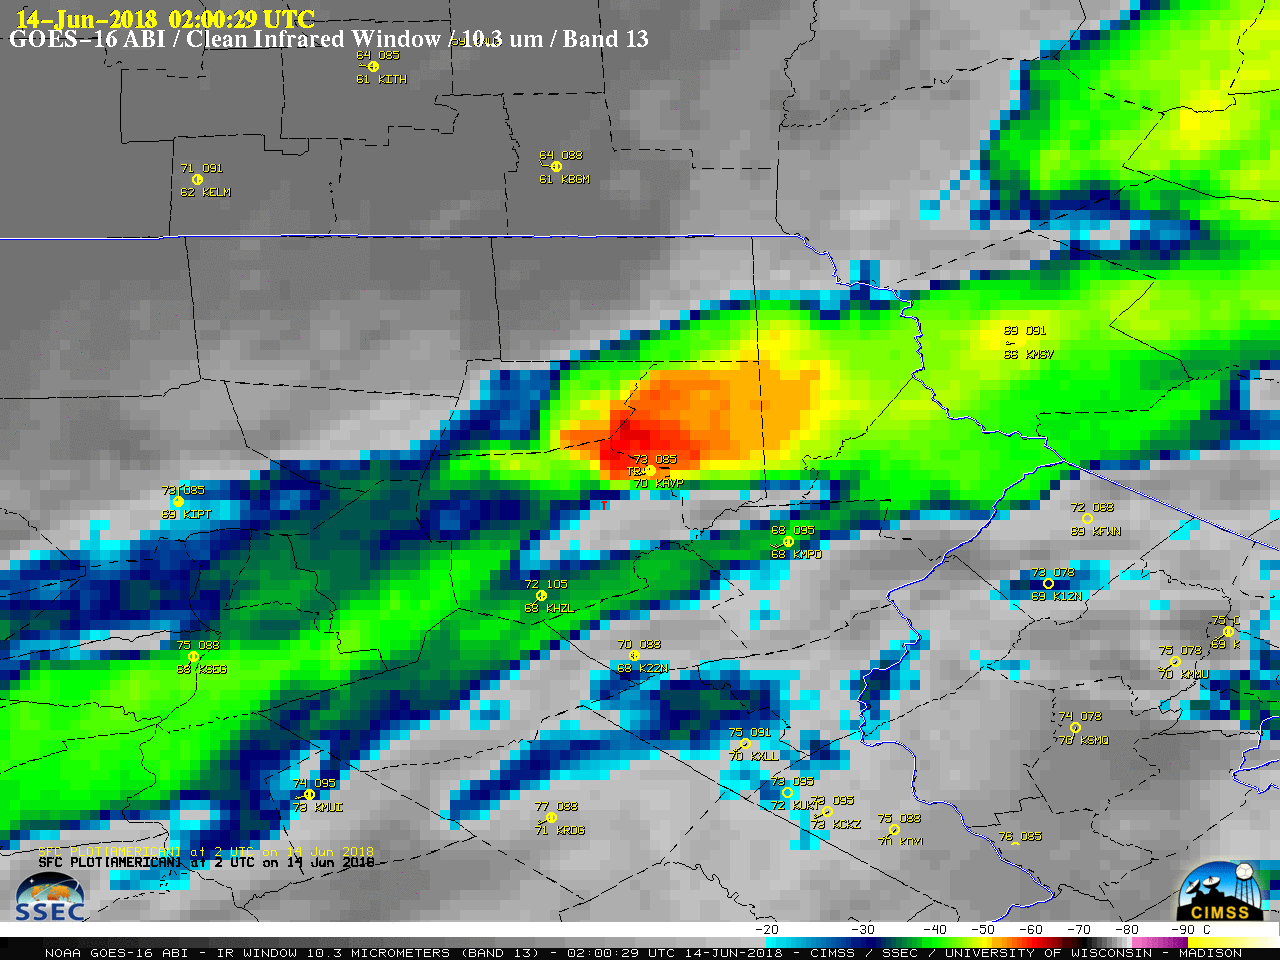 GOES-16 Band 13 (Clean Infrared Window, 10.3 µm) images, with SPC storm reports plotted in red [click to animate]